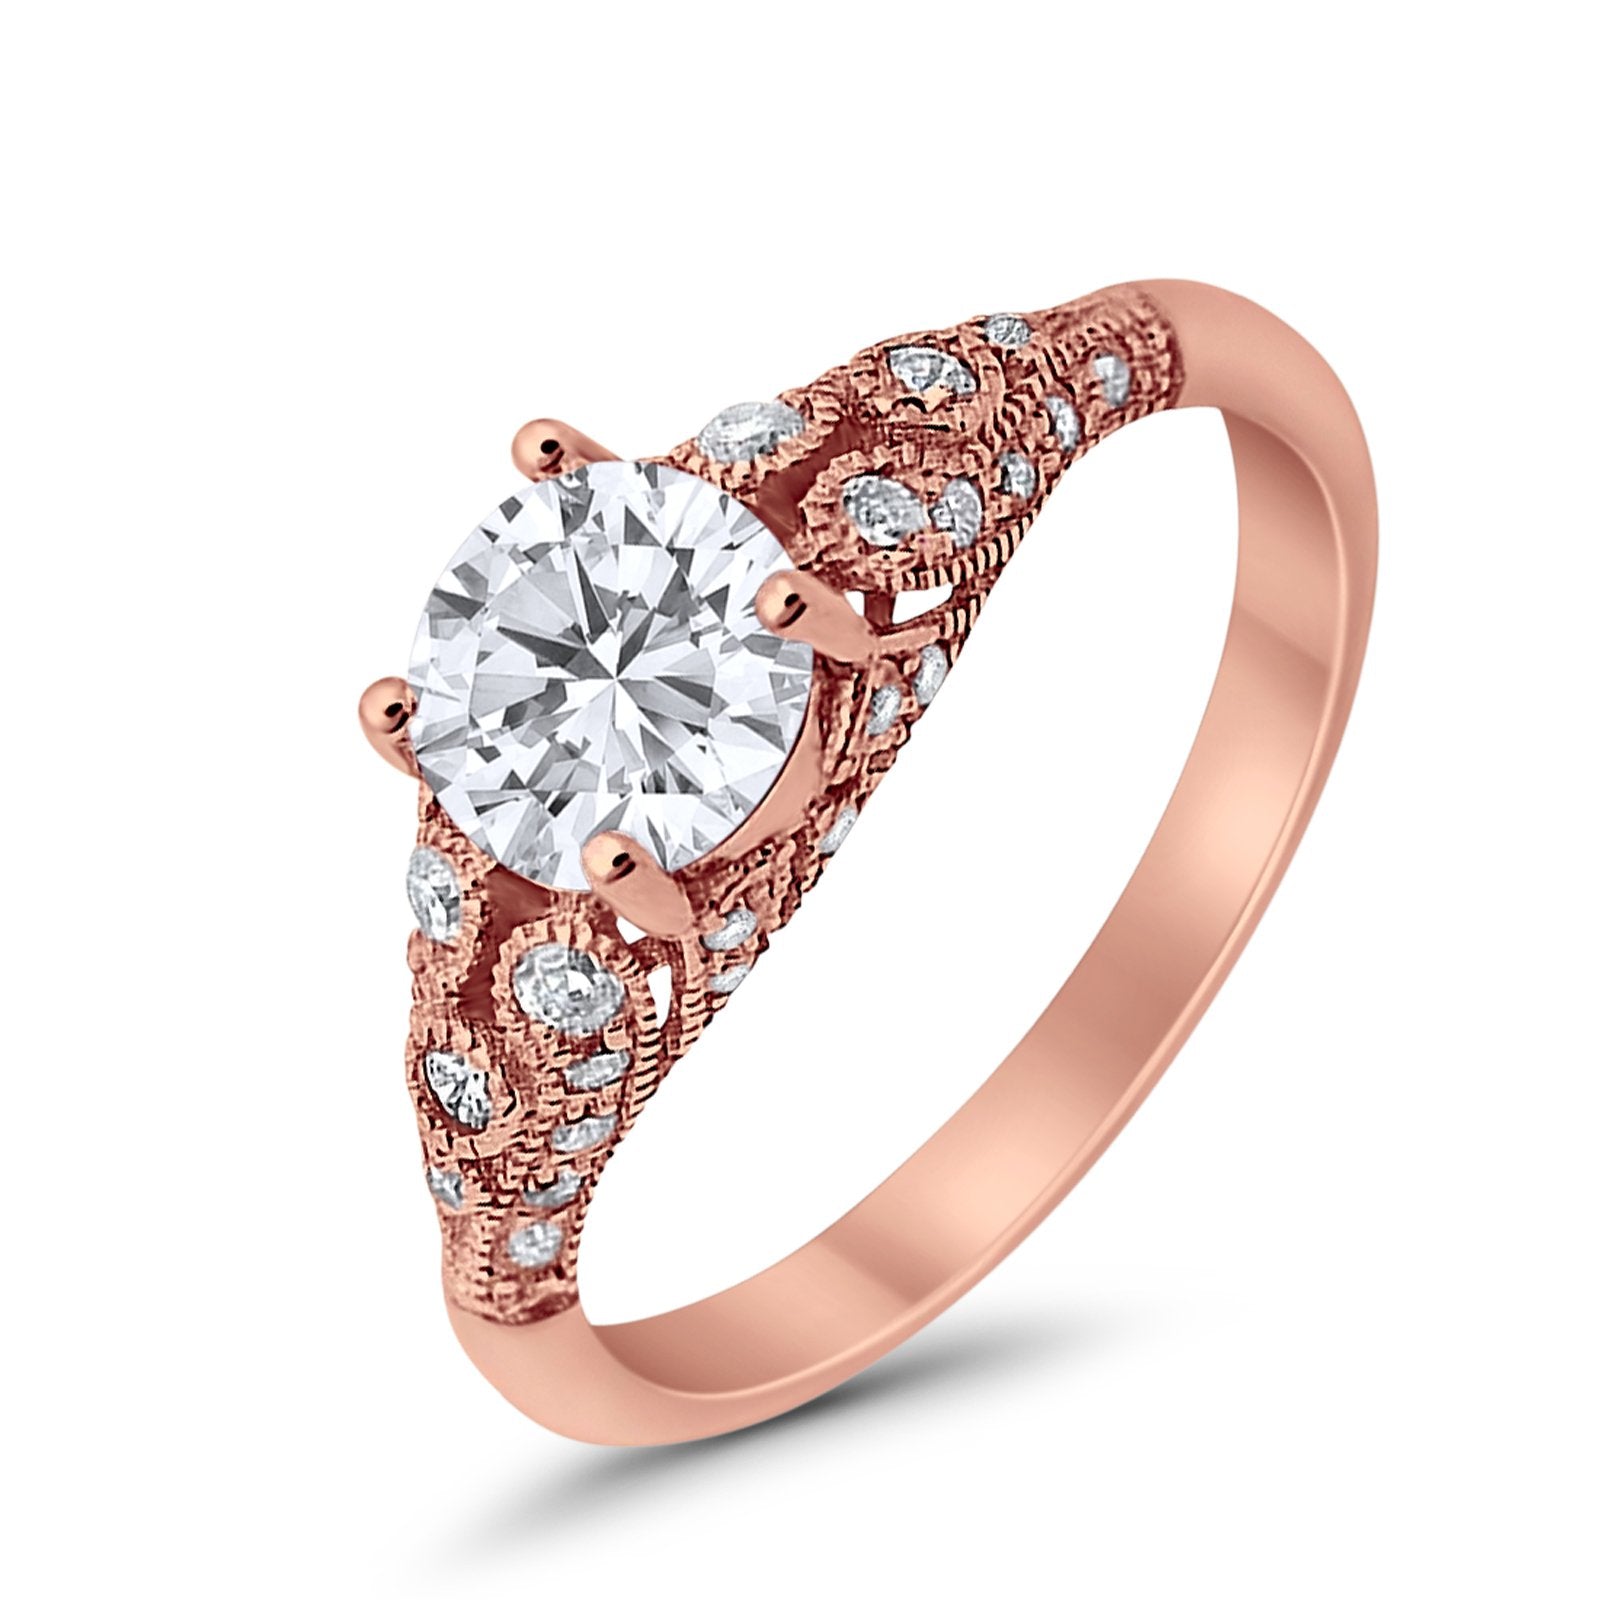 Vintage Style Engagement Ring Rose Tone,Simulated Cubic Zirconia 925 Sterling Silver